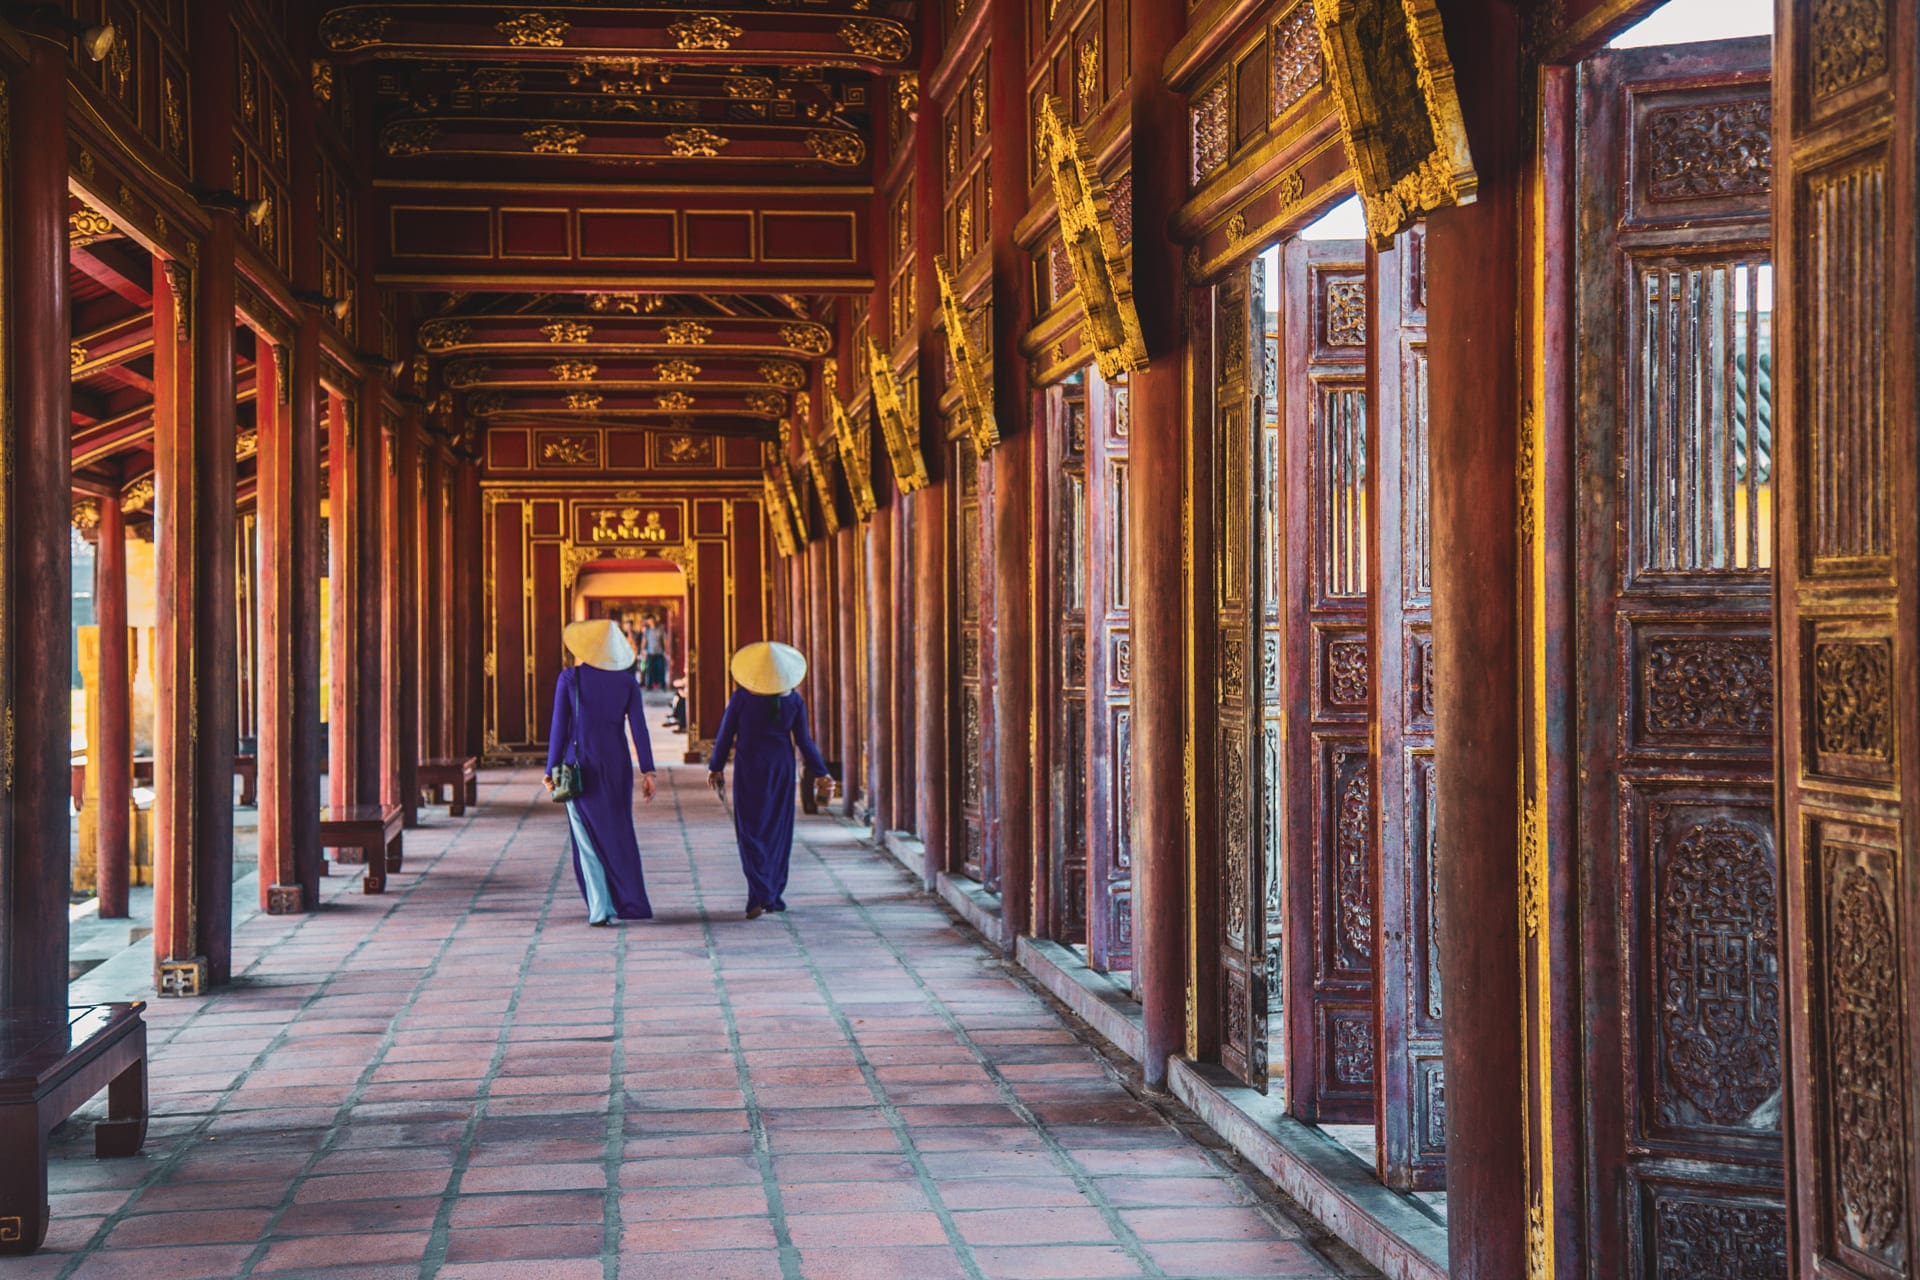 monks in the imperial city of Hue in Vietnam